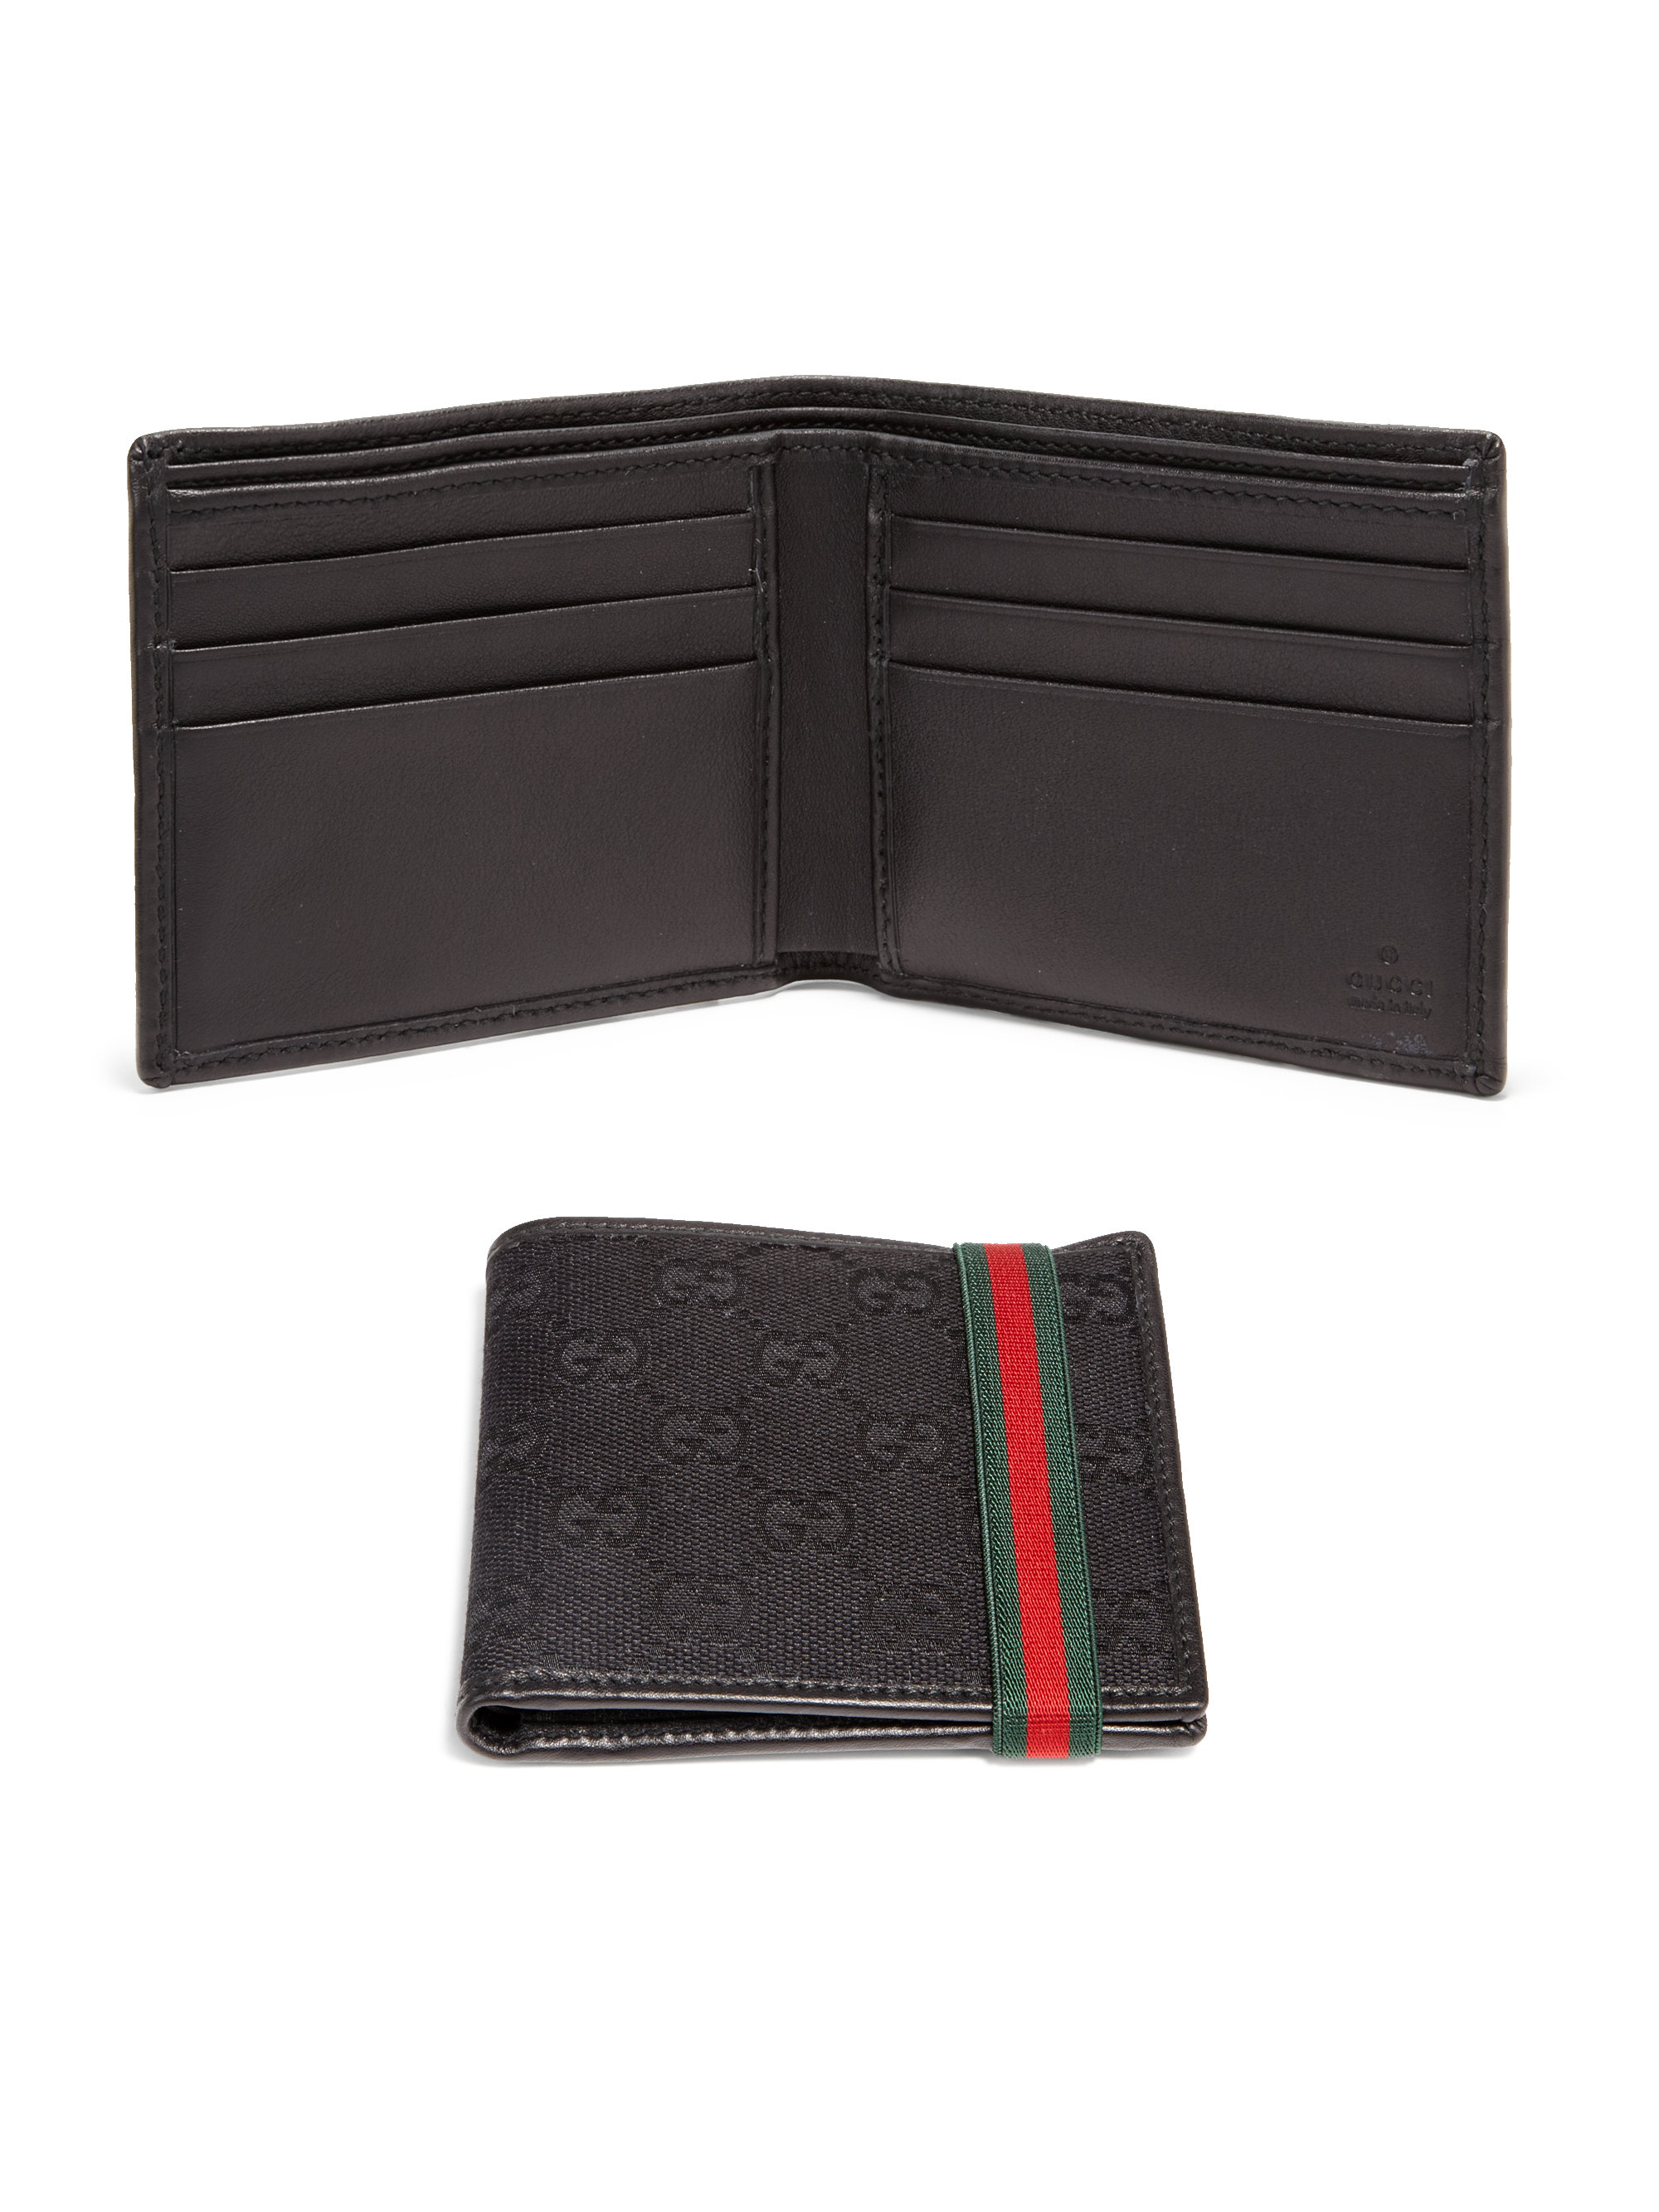 Gucci Leather Wallet in Black for Men - Lyst